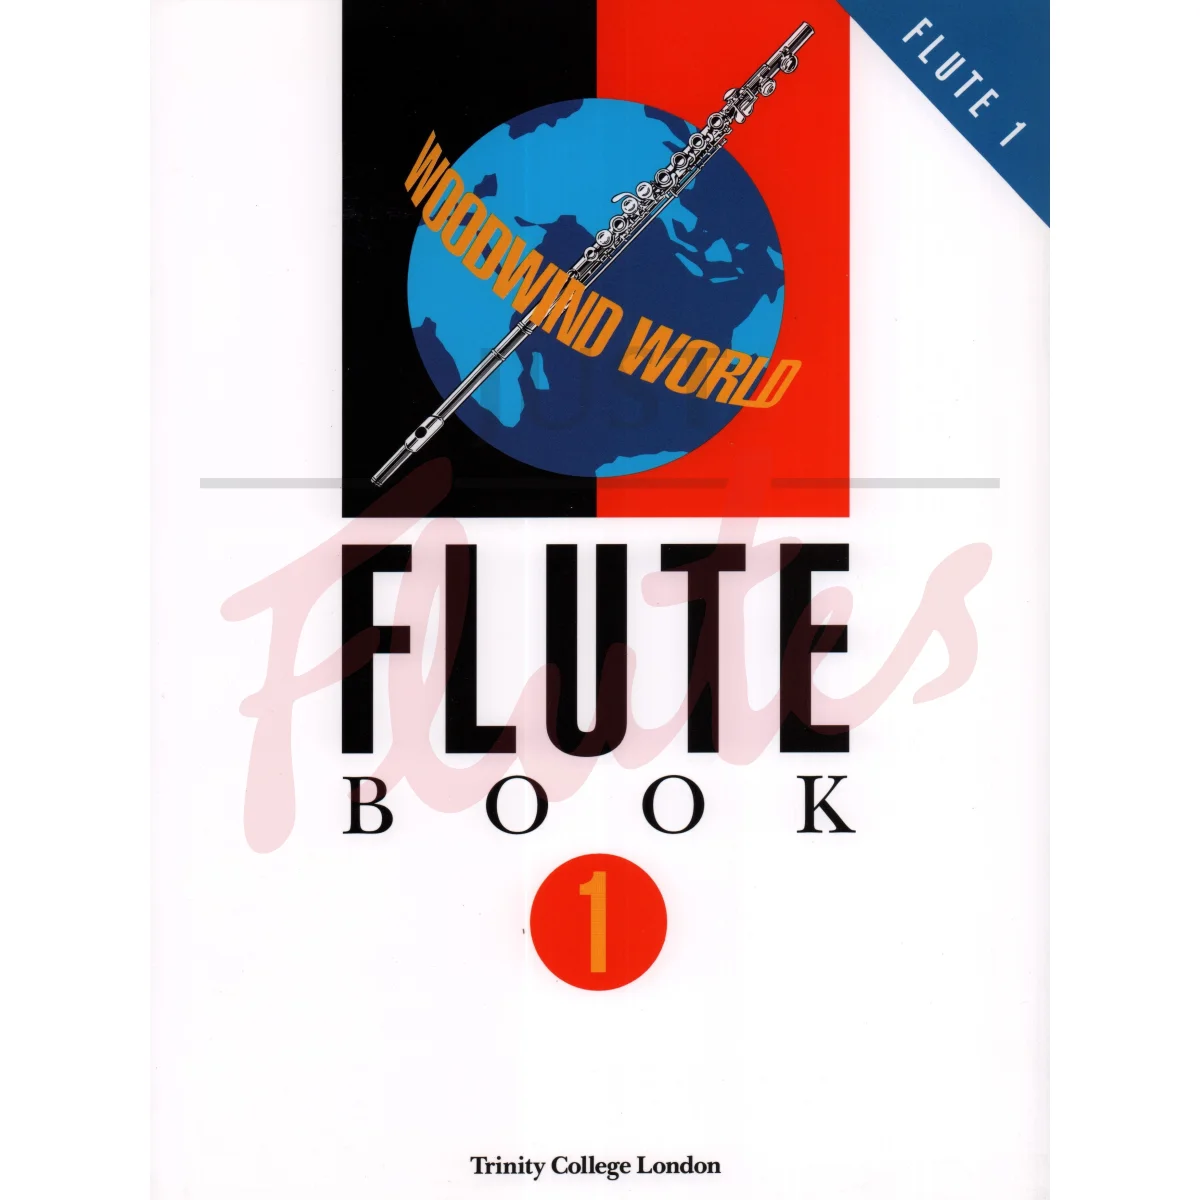 Woodwind World Flute Book 1 (Complete)